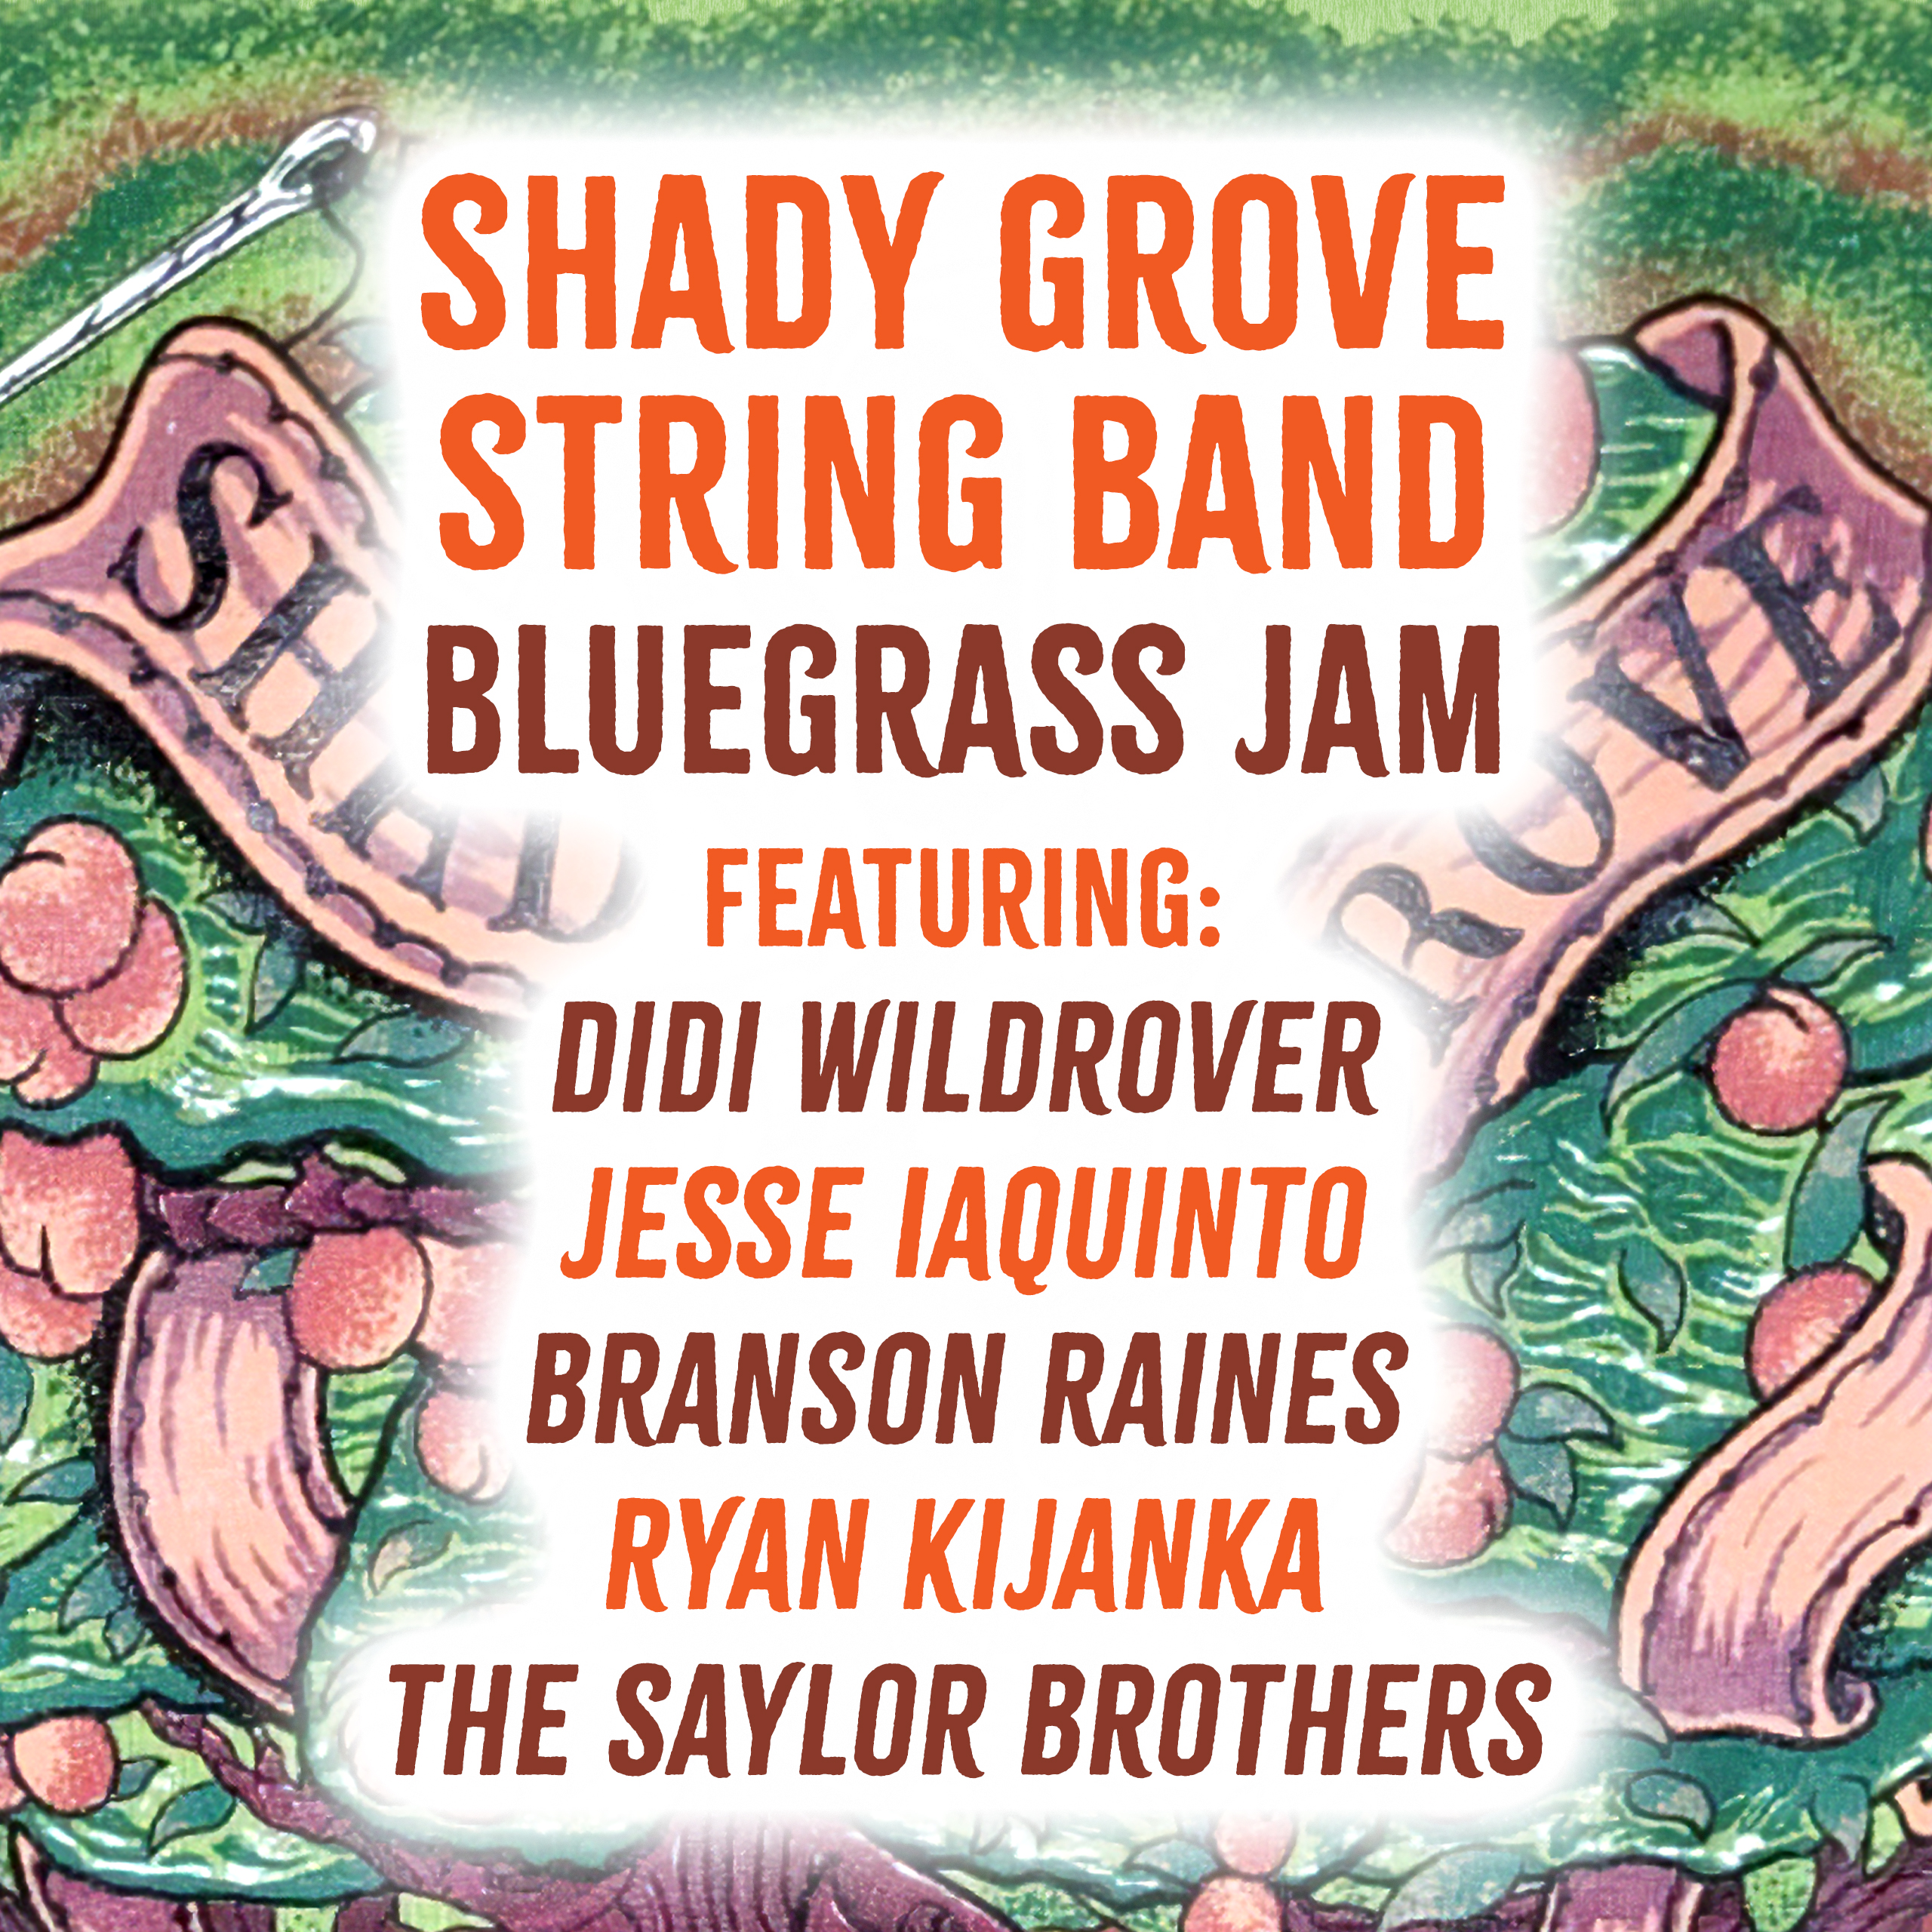 Shady Grove String Band: Official Billy Strings Pre-Party!